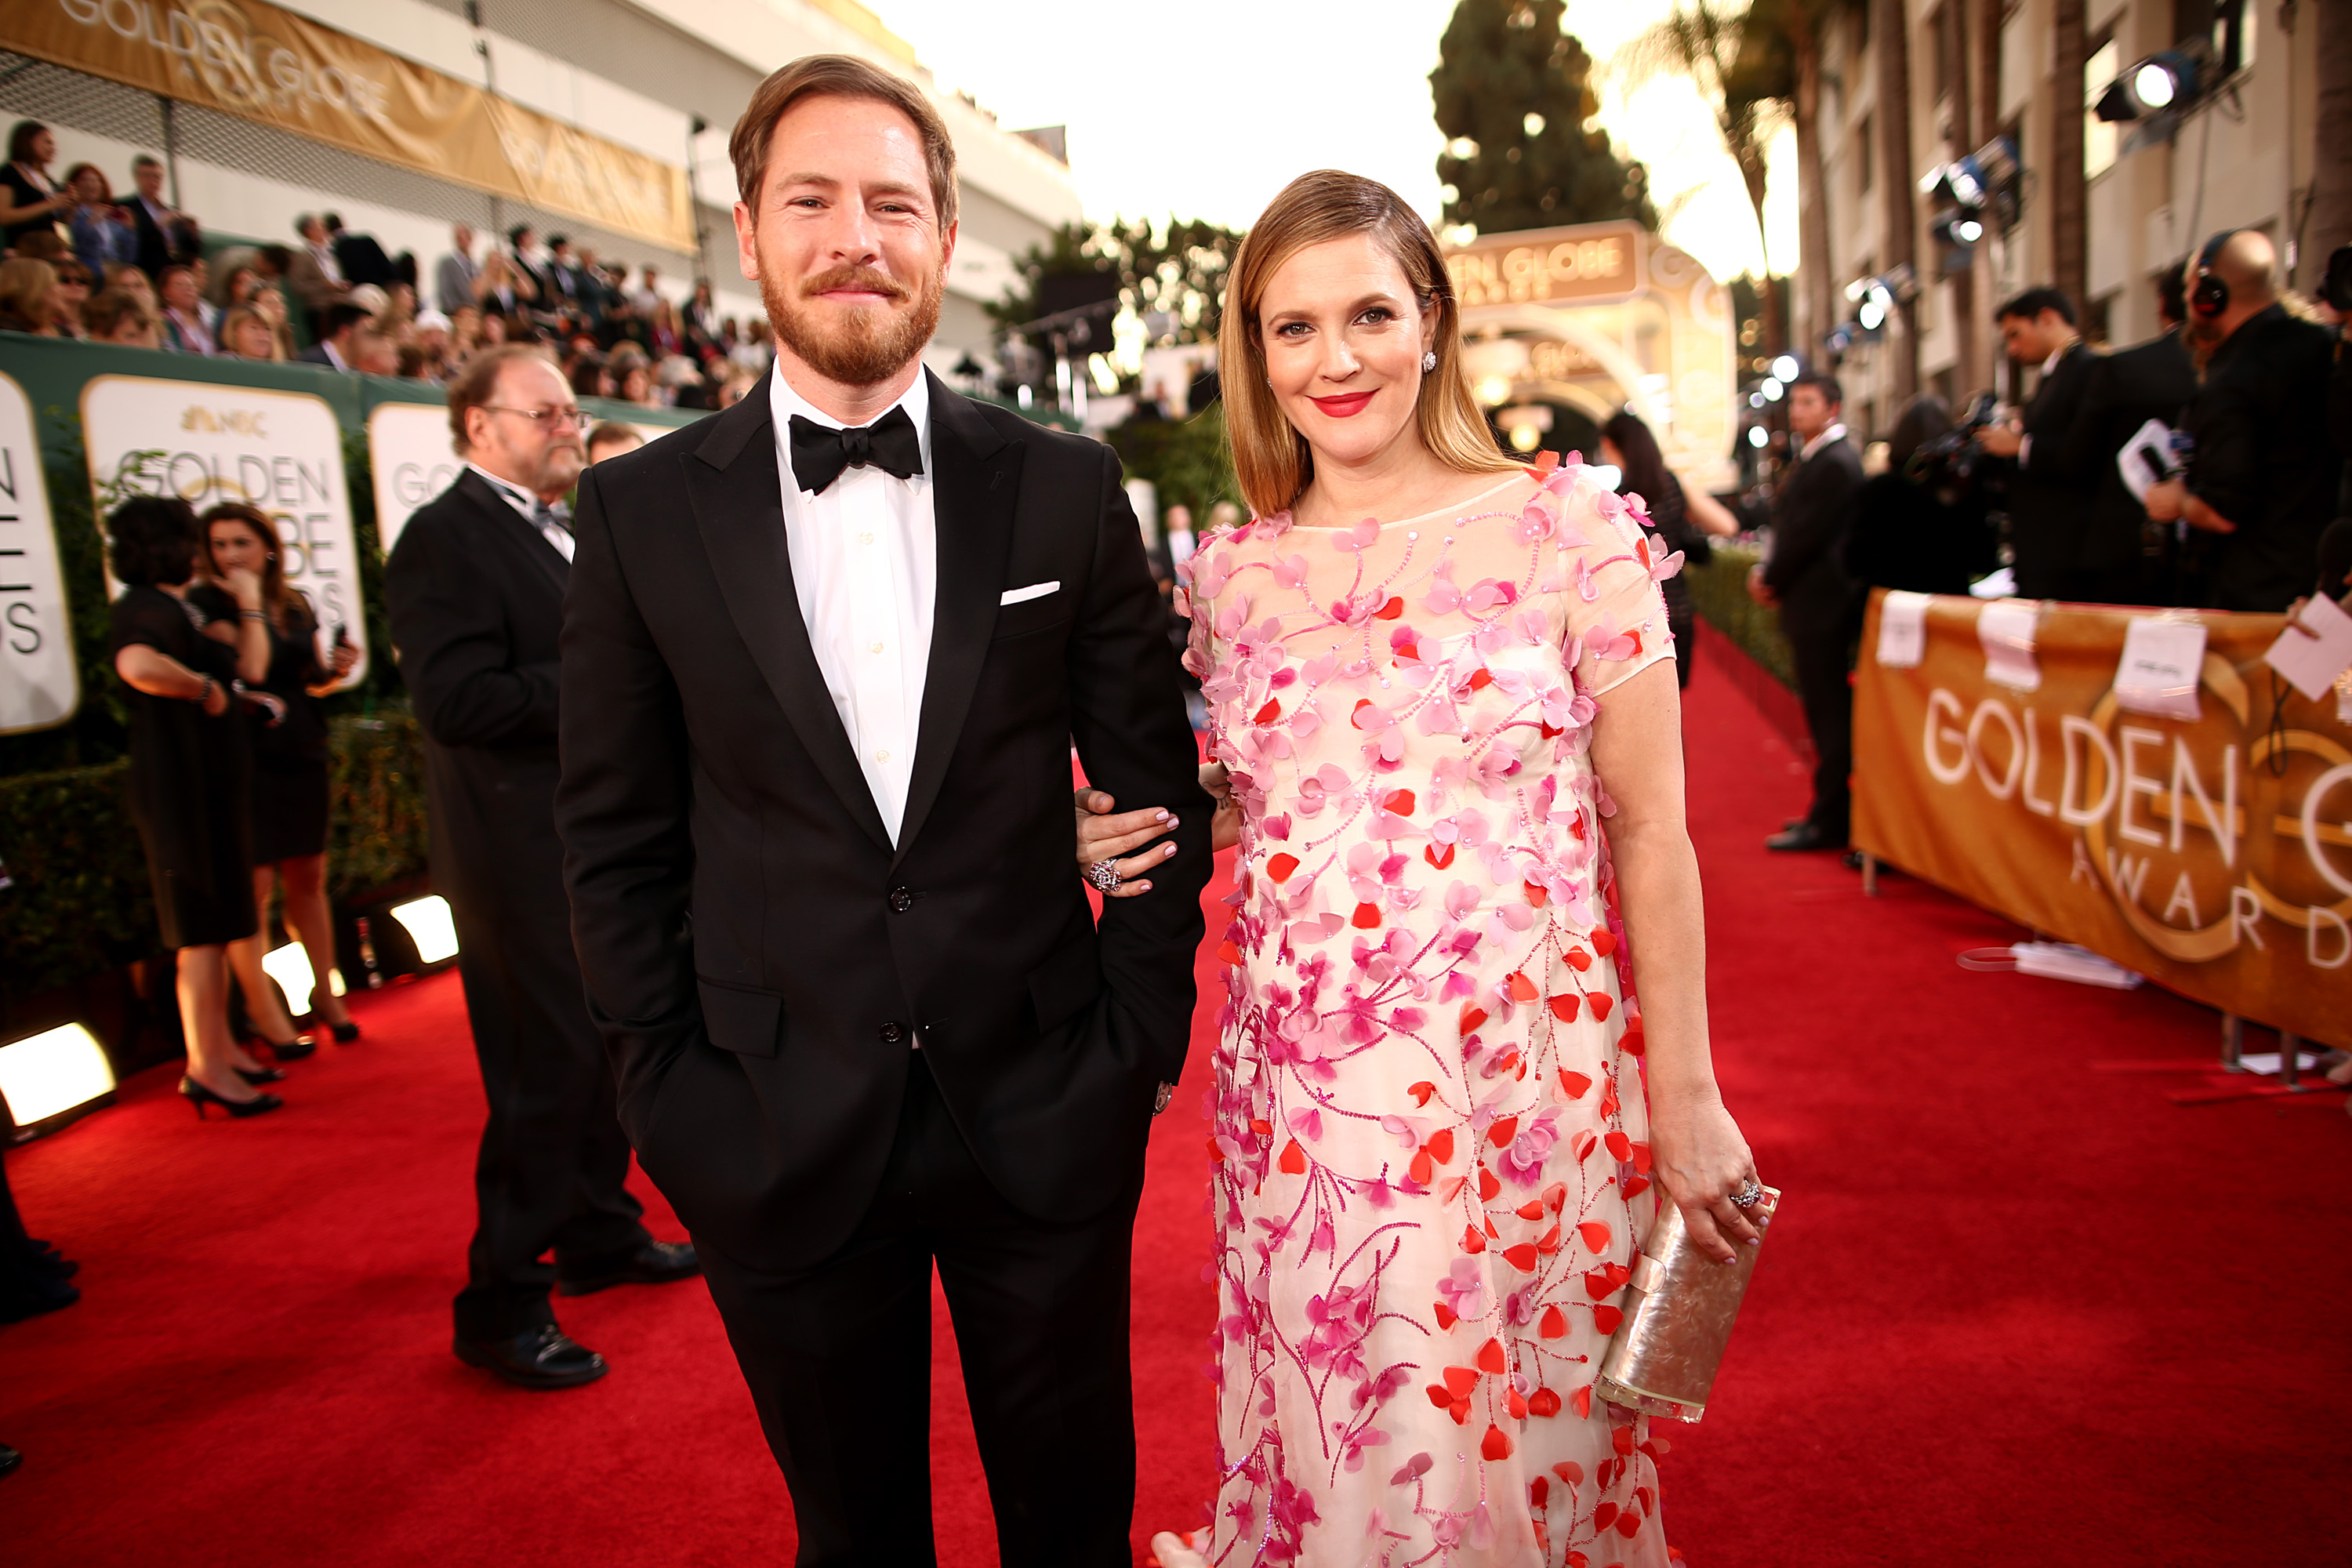 Will Kopelman and Drew Barrymore pose for photo on red carpet at Golden Globe Awards in 2014